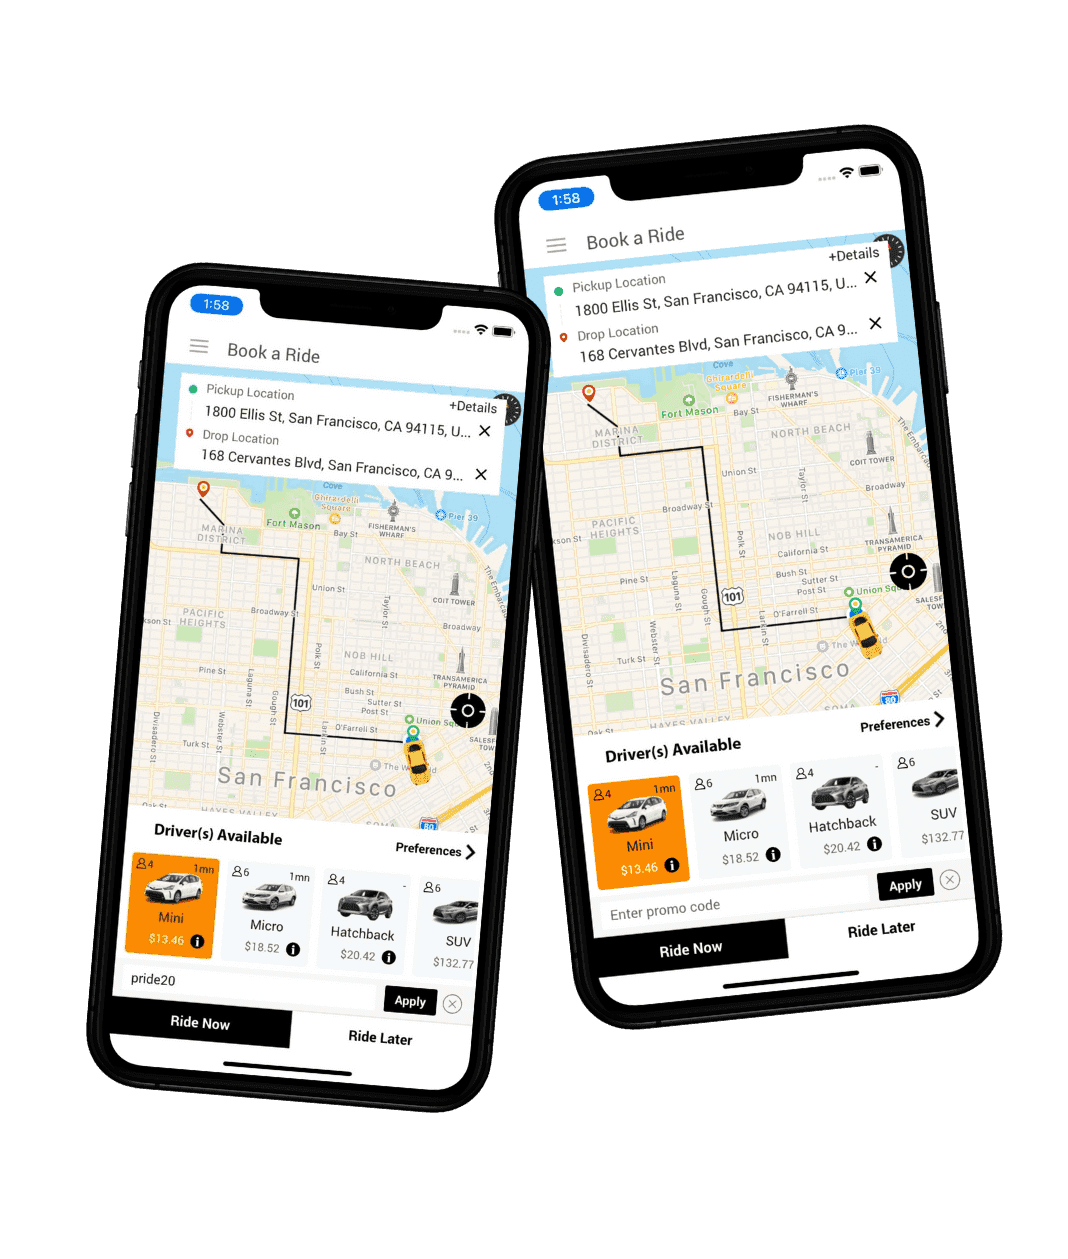 auto applied promo codes feature in taxi app